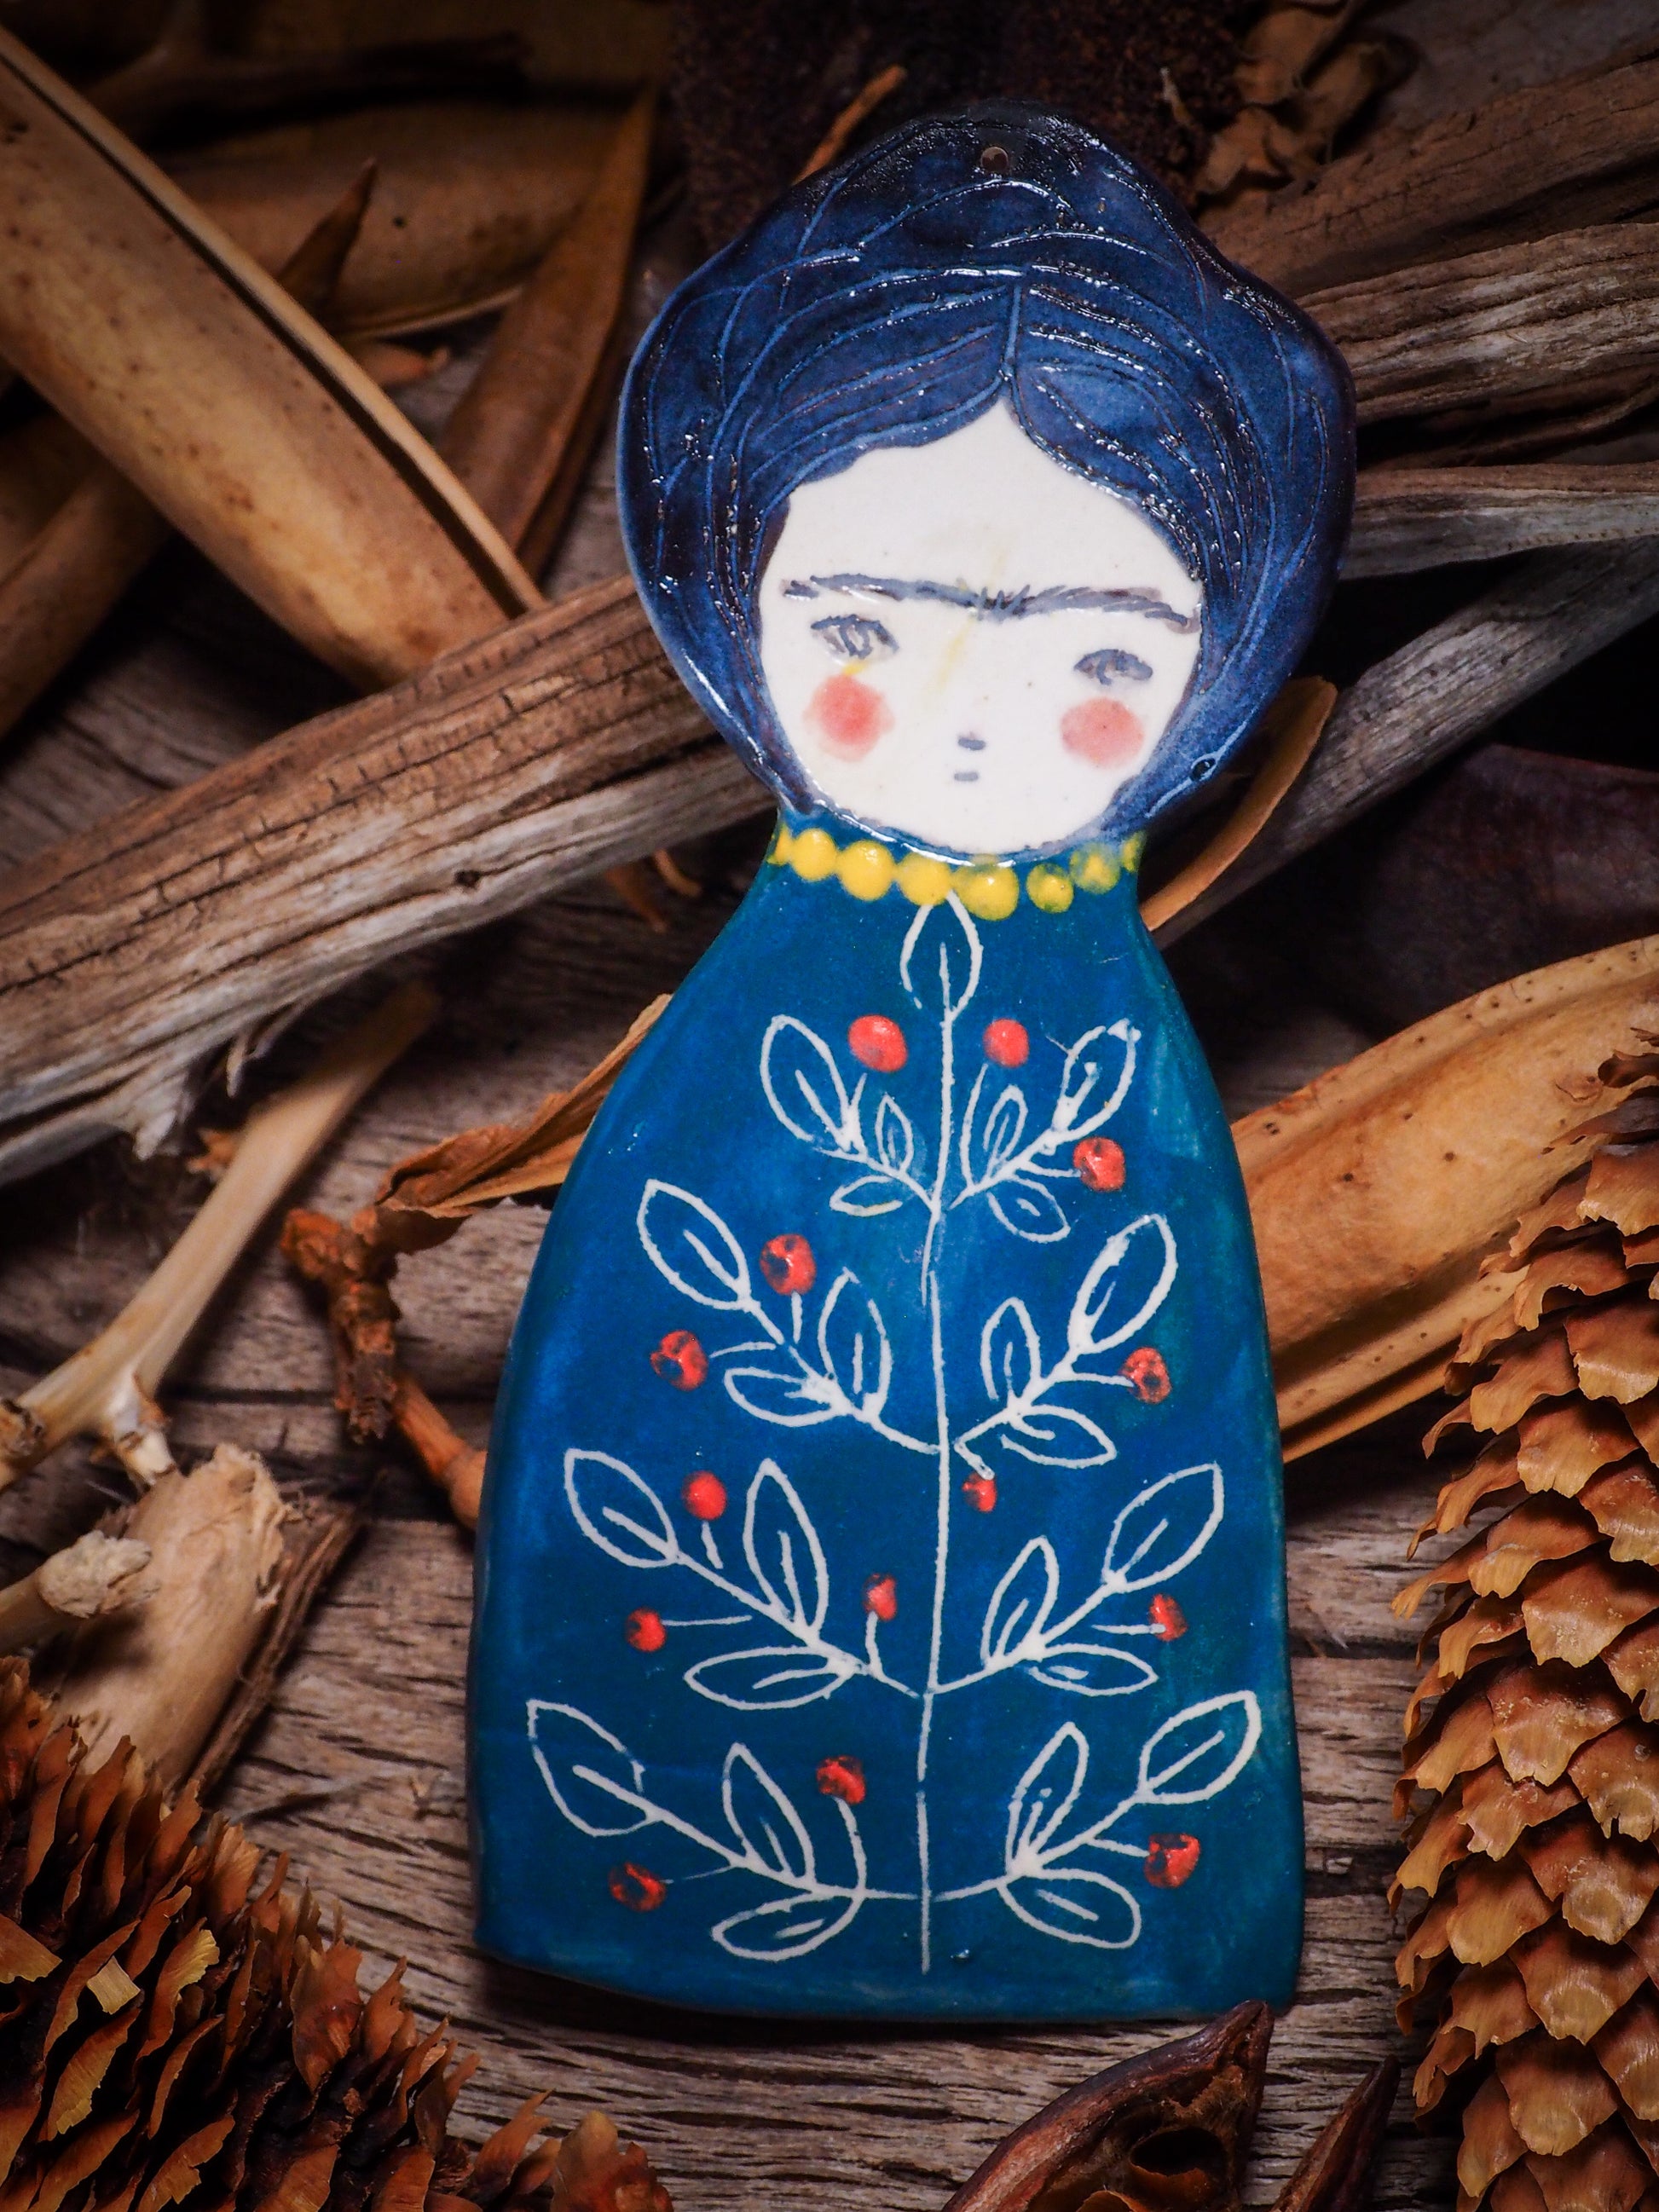 An original Christmas Holiday tree glazed ceramic ornament handmade by Idania Salcido, the artist behind Danita Art. Glazed carved sgraffito stoneware, hand painted and decorated, it is illustrated by hand with Frida Kahlo, Mexican motifs and bold, bright and colorful ceramic glazes.